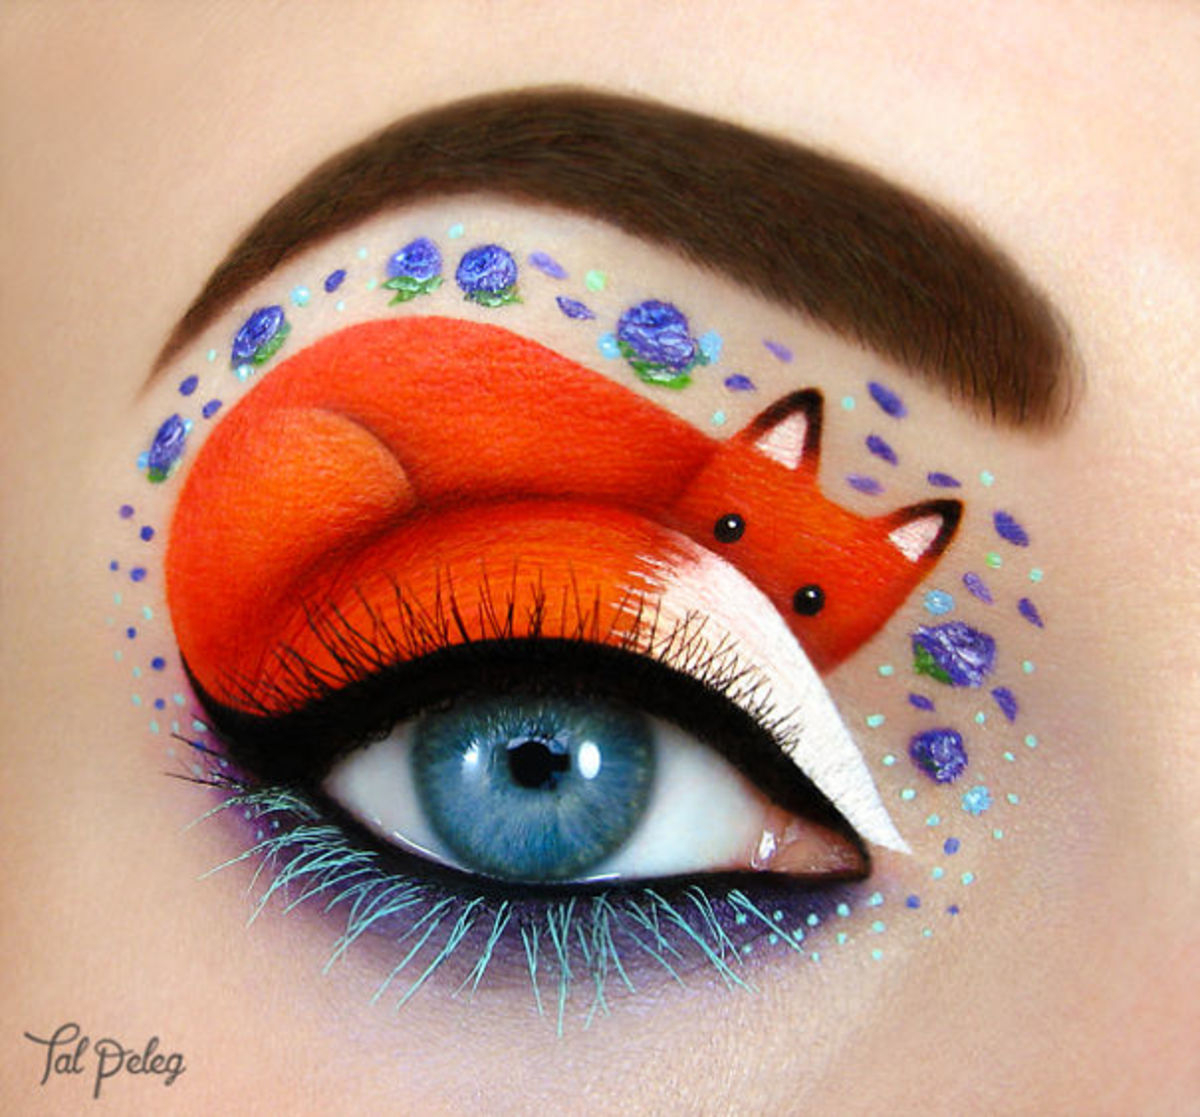 Eye Makeup Art Artist Uses Peoples Eyes As The Canvas For Her Incredible Artworks